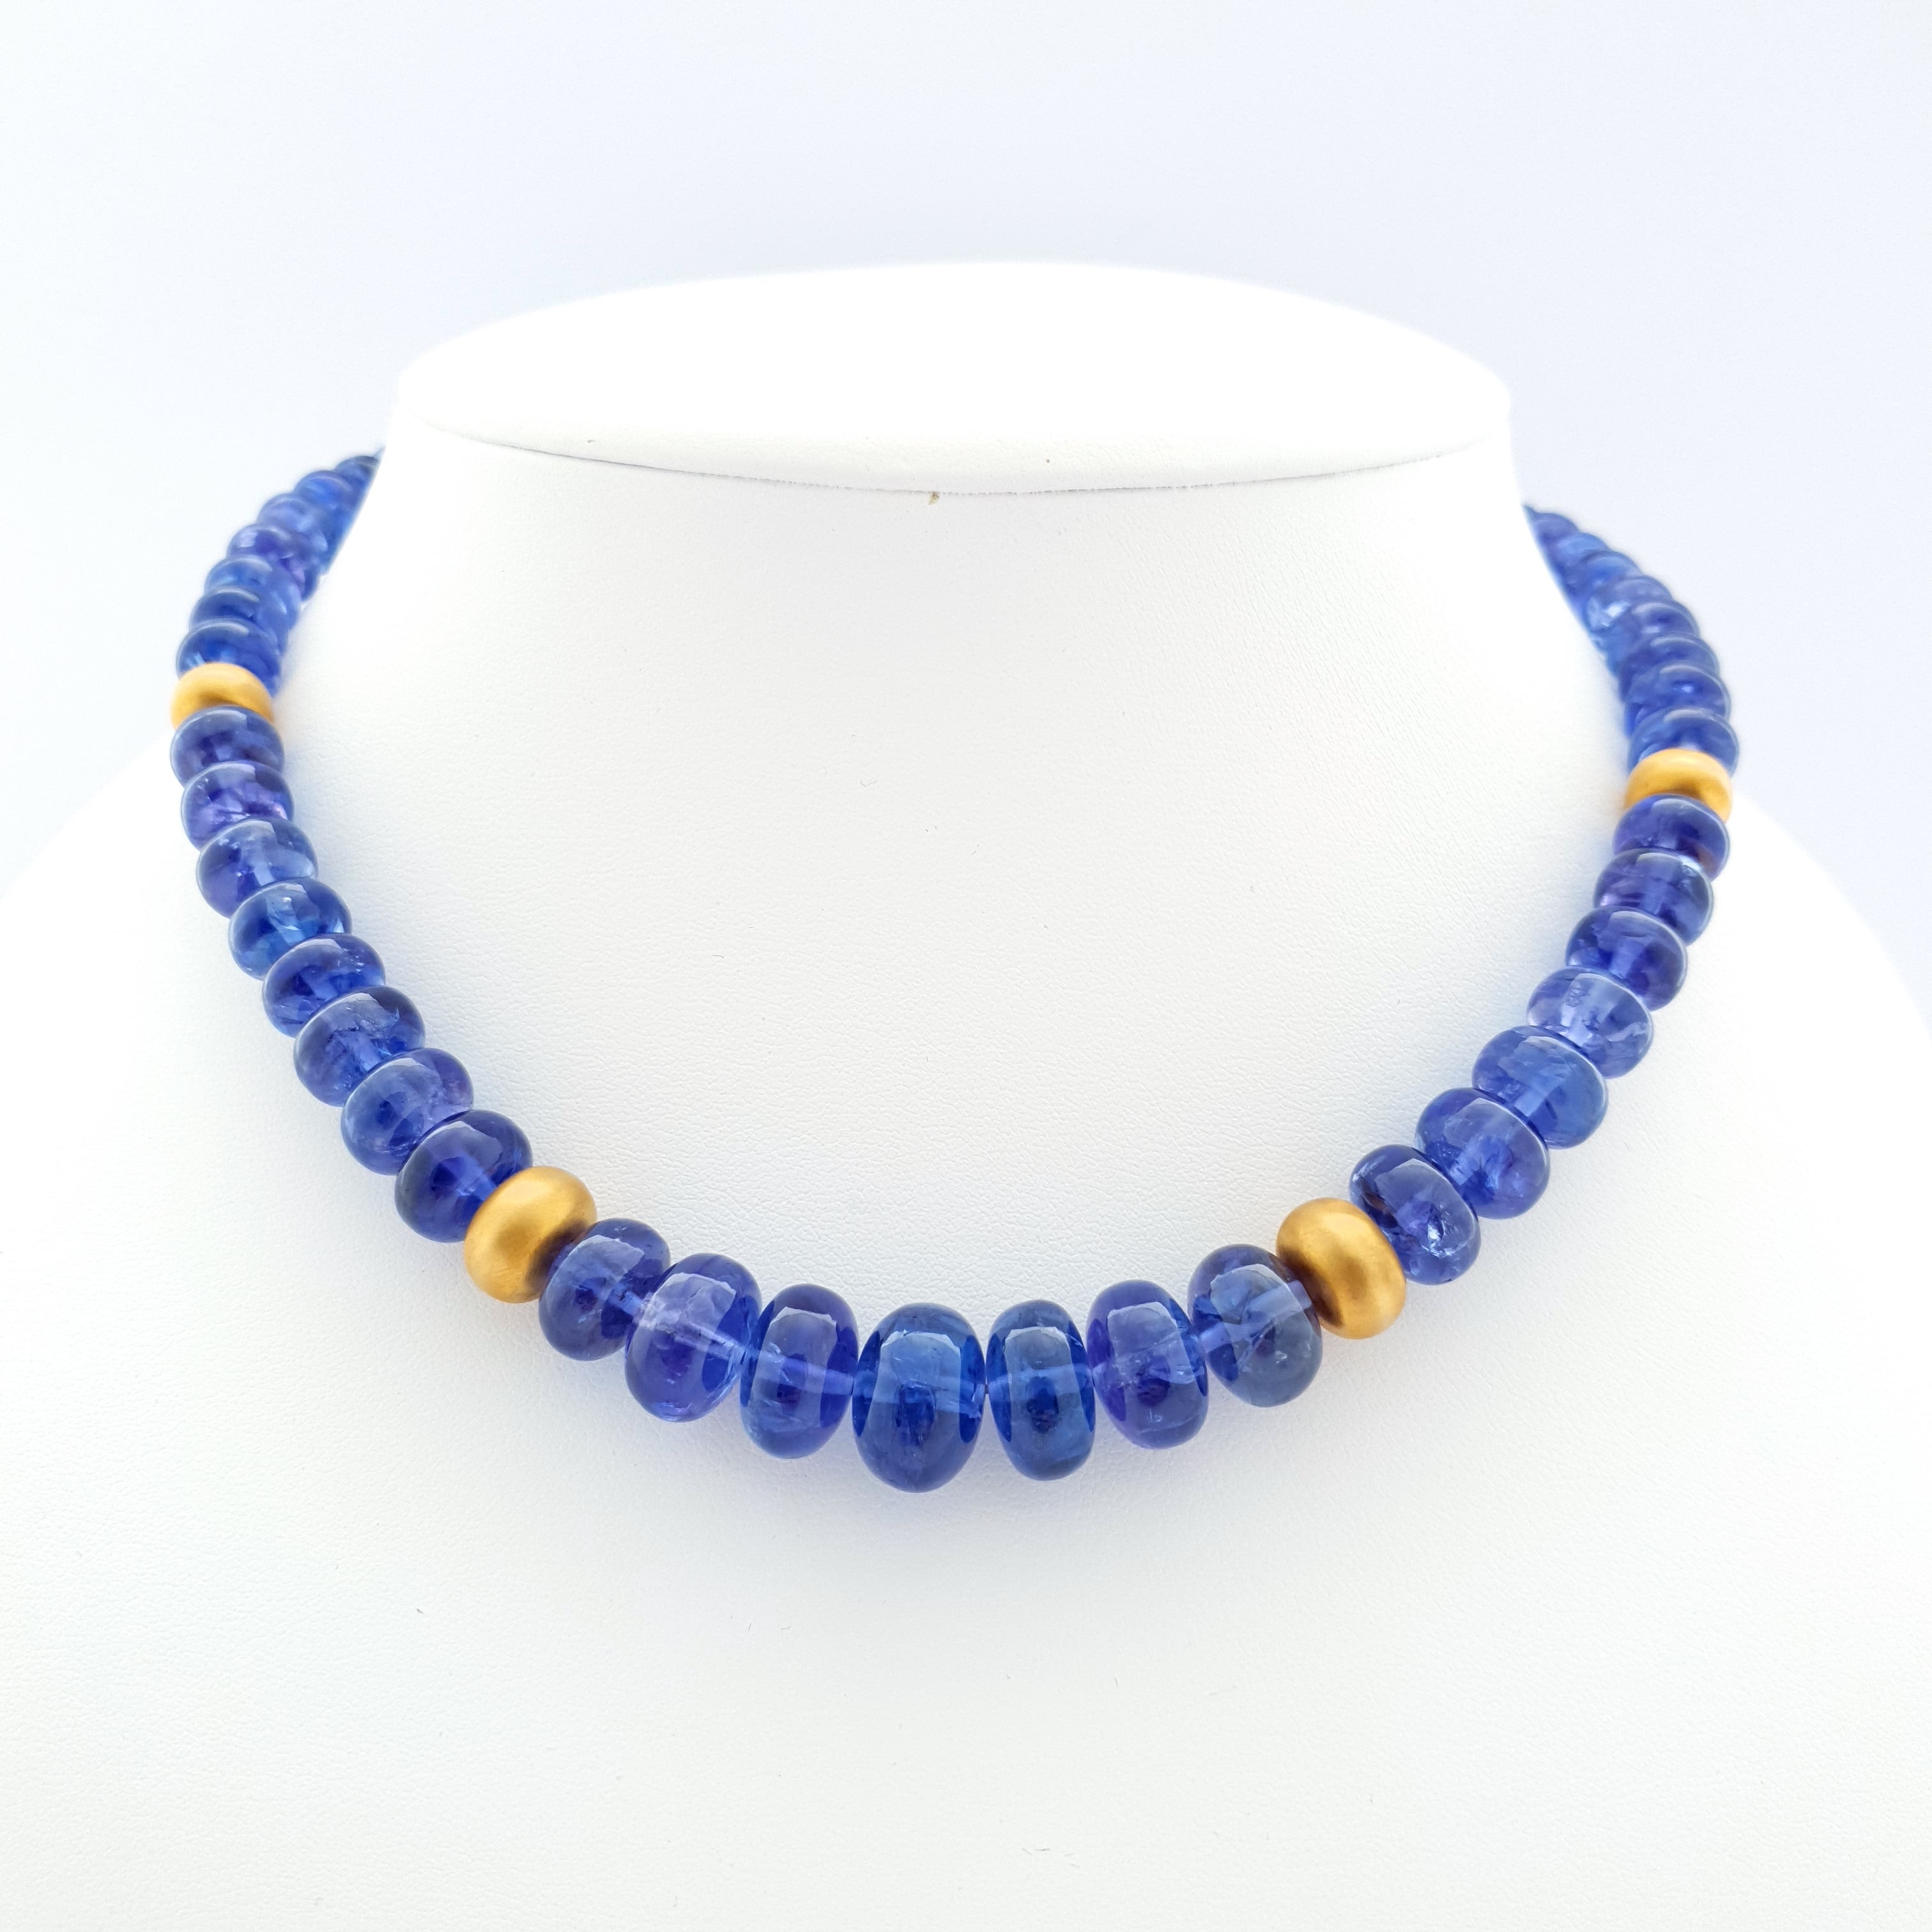 This Cornflower blue Tanzanite Rondel Beaded Necklace with 18 Carat Mat Yellow Gold is totally handmade. Cutting as well as goldwork are made in German quality. The screw clasp is easy to handle and very secure.
Timeless and classic design combined